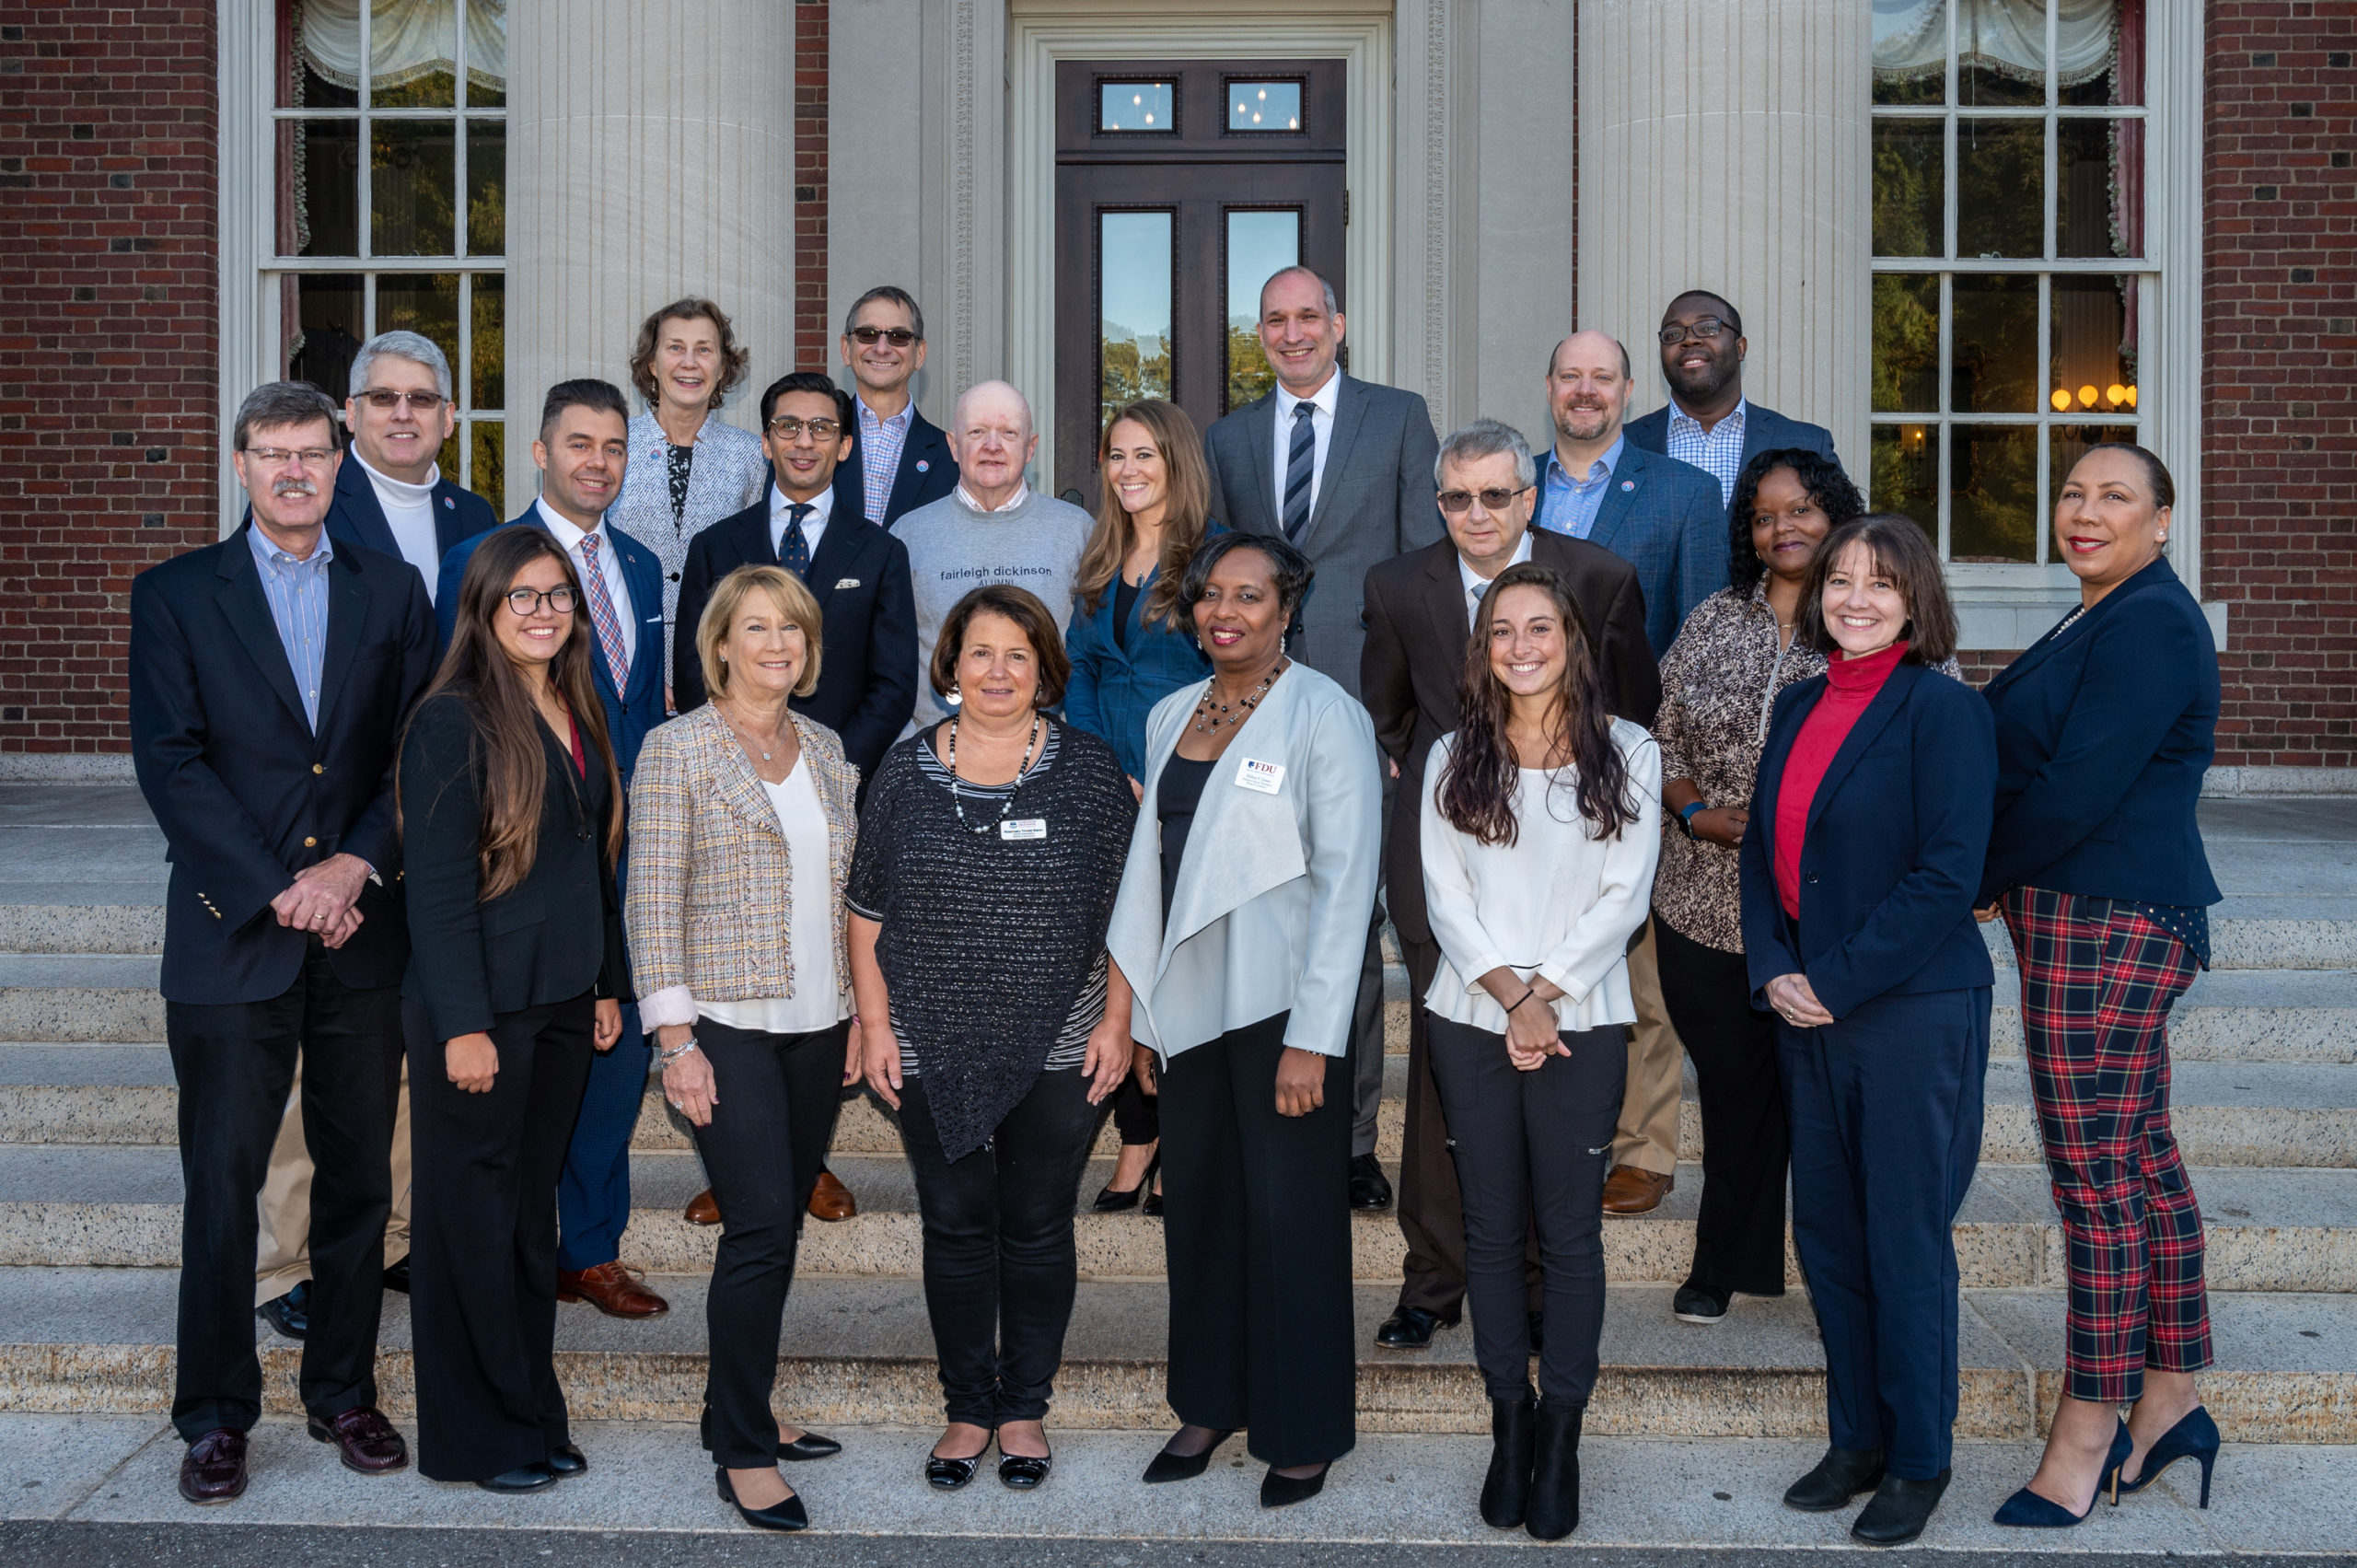 Group photo of the Board of Governors